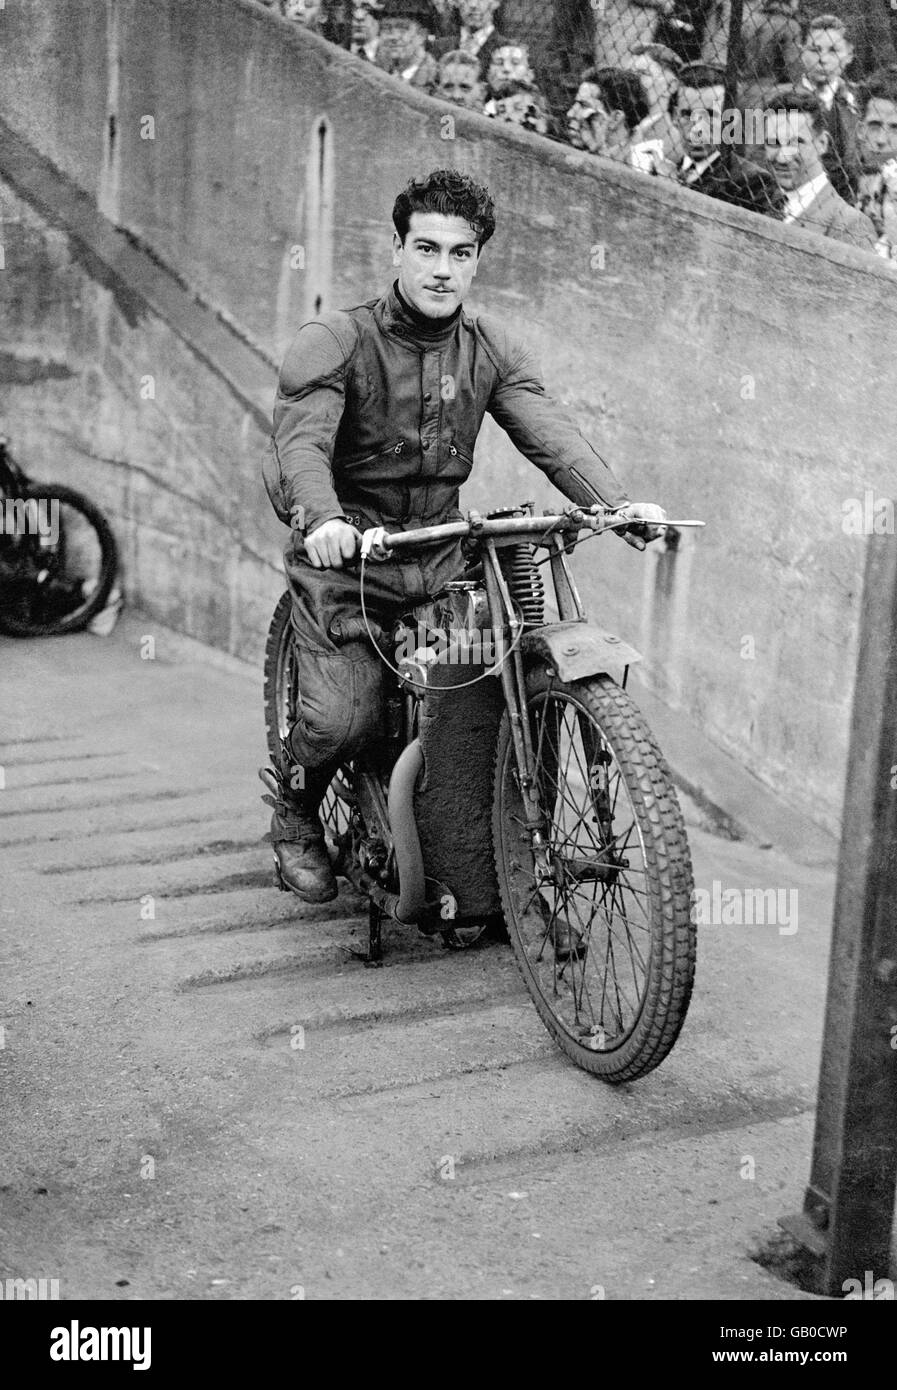 Speedway - International - Teams - Australia - London - 1936. Lionel van Praag, the young Australian rider who won the inaugural World Speedway Championship at Wembley on 10th September 1936. Stock Photo